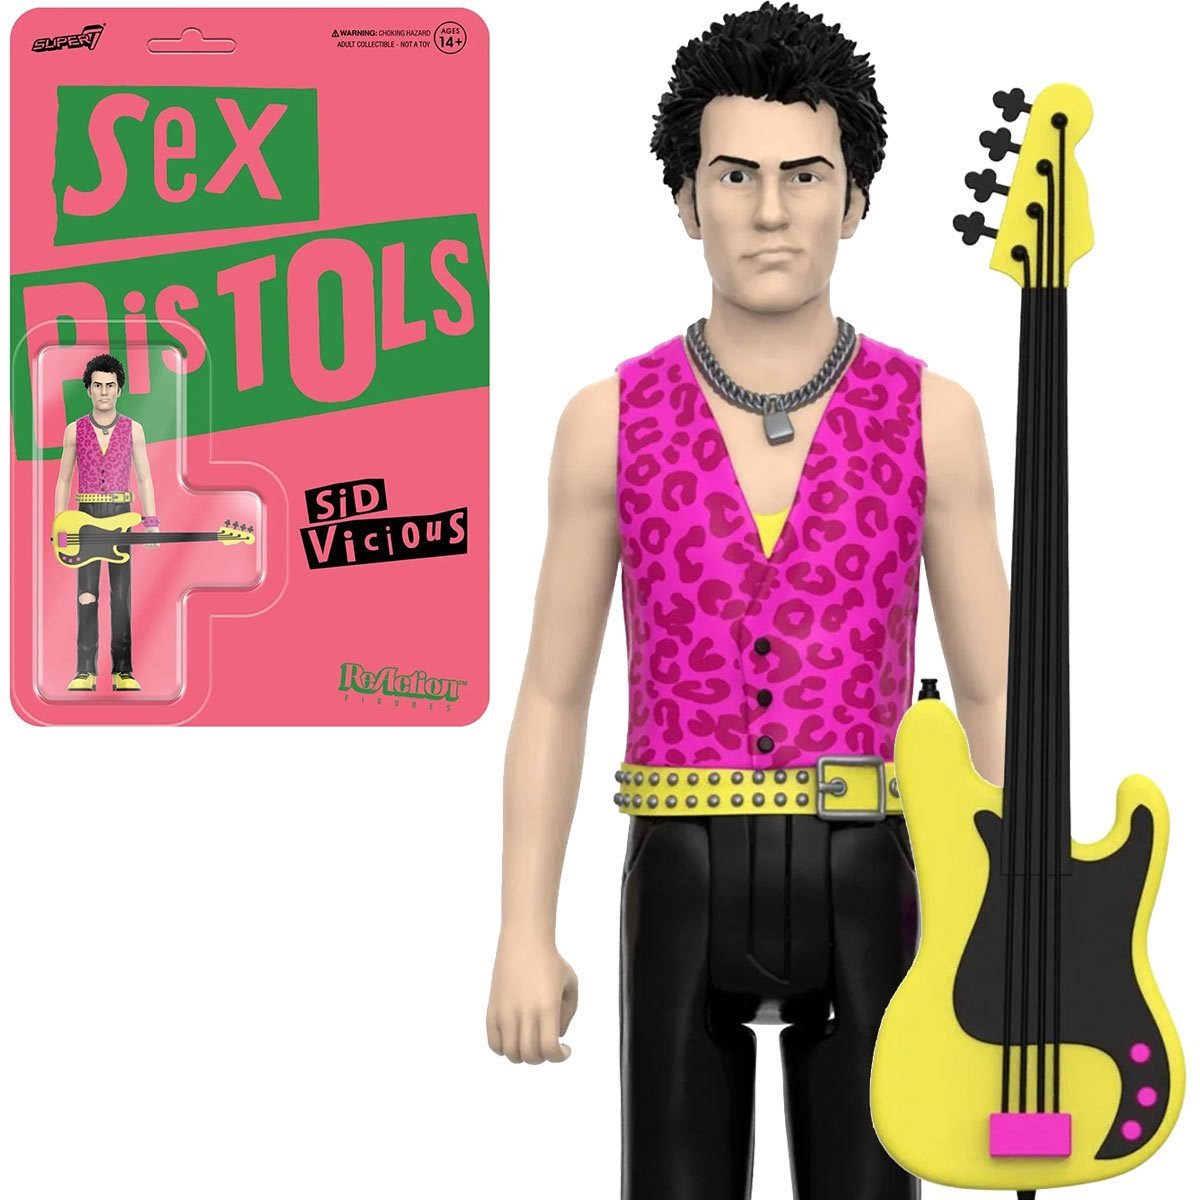 Sex Pistols Sid Vicious (Never Mind the Bollocks) 3 3/4-inch ReAction Figure - Simon's Collectibles